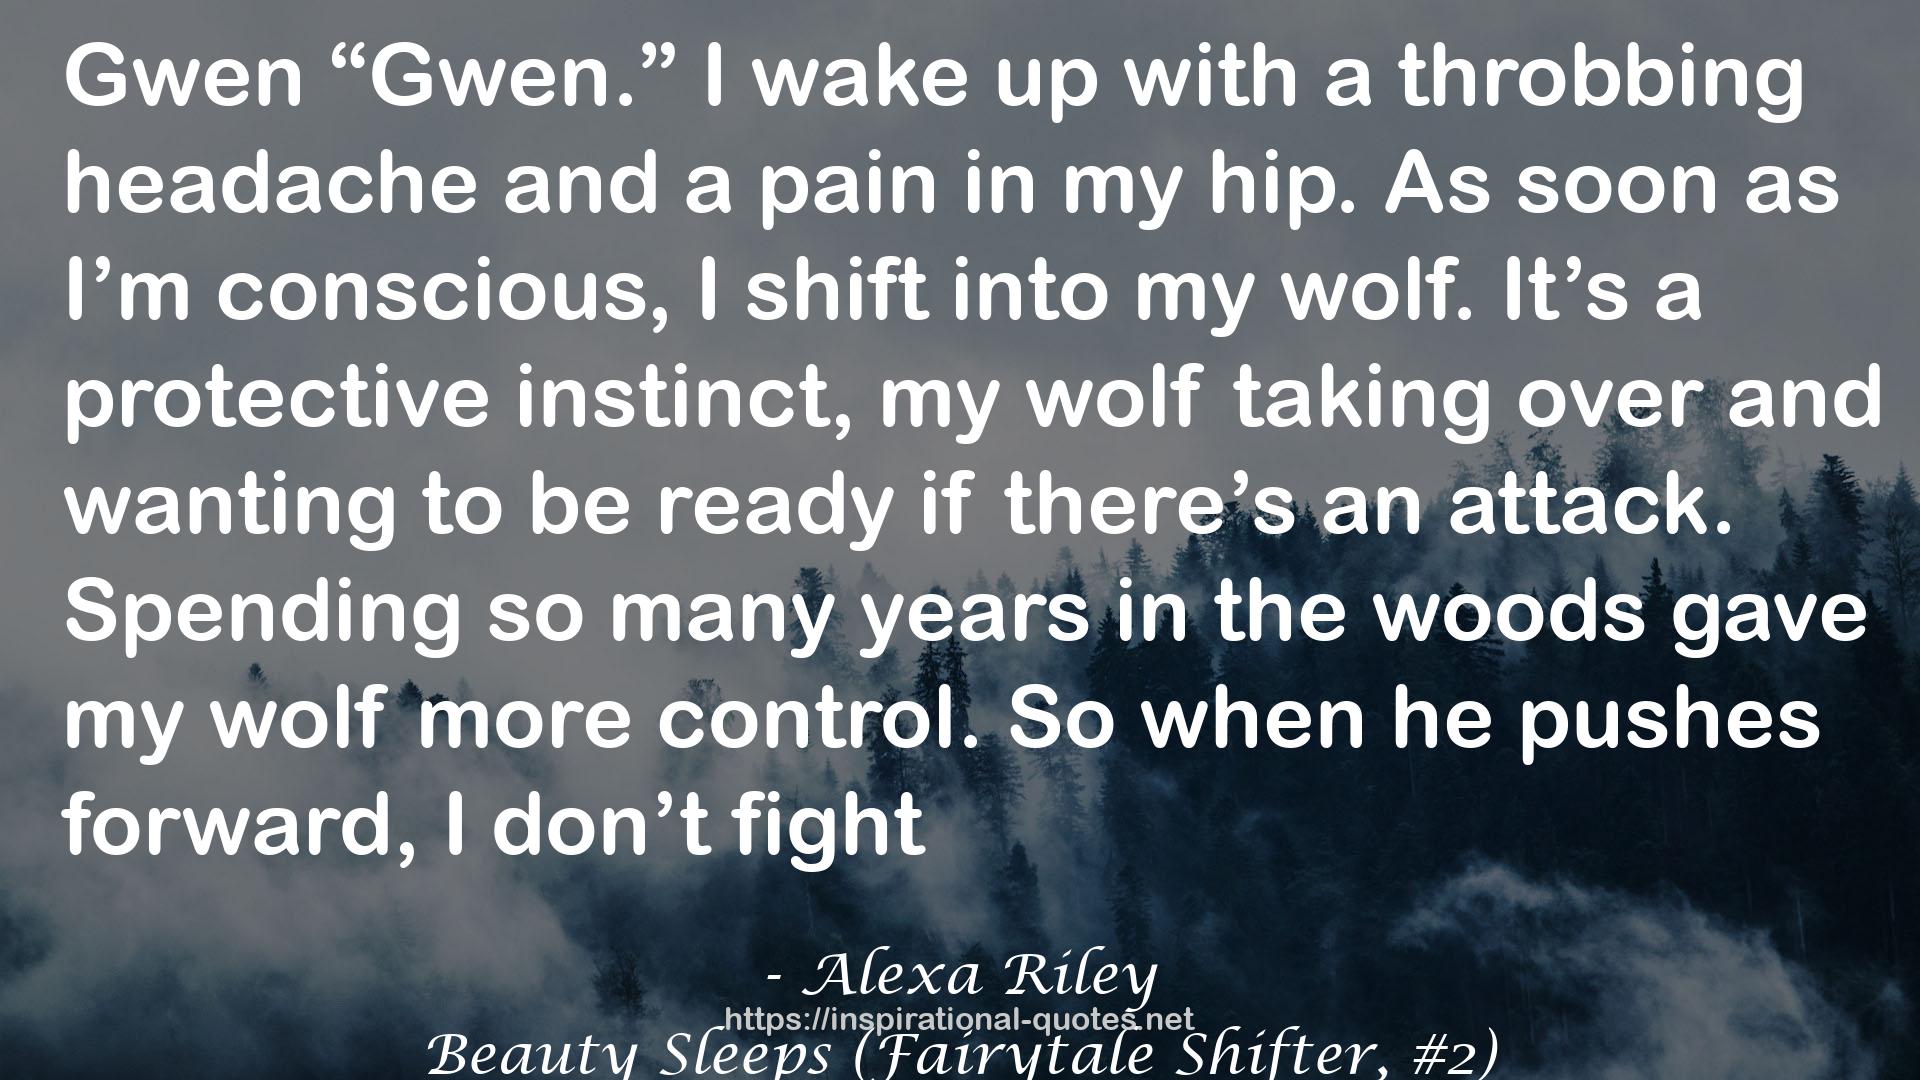 Beauty Sleeps (Fairytale Shifter, #2) QUOTES